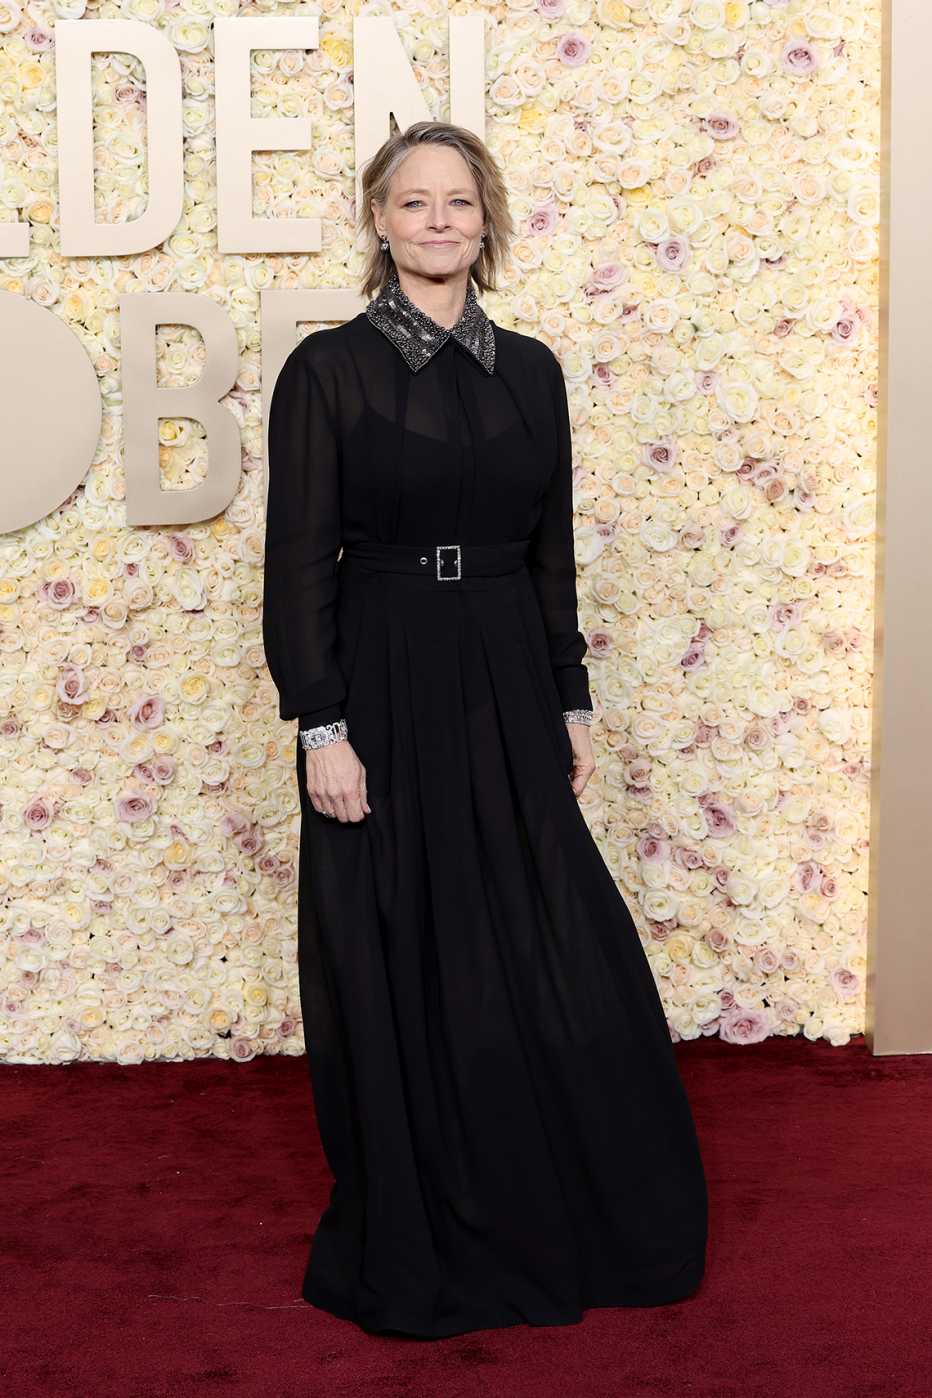 Jodie Foster on the red carpet at the 81st Golden Globe Awards